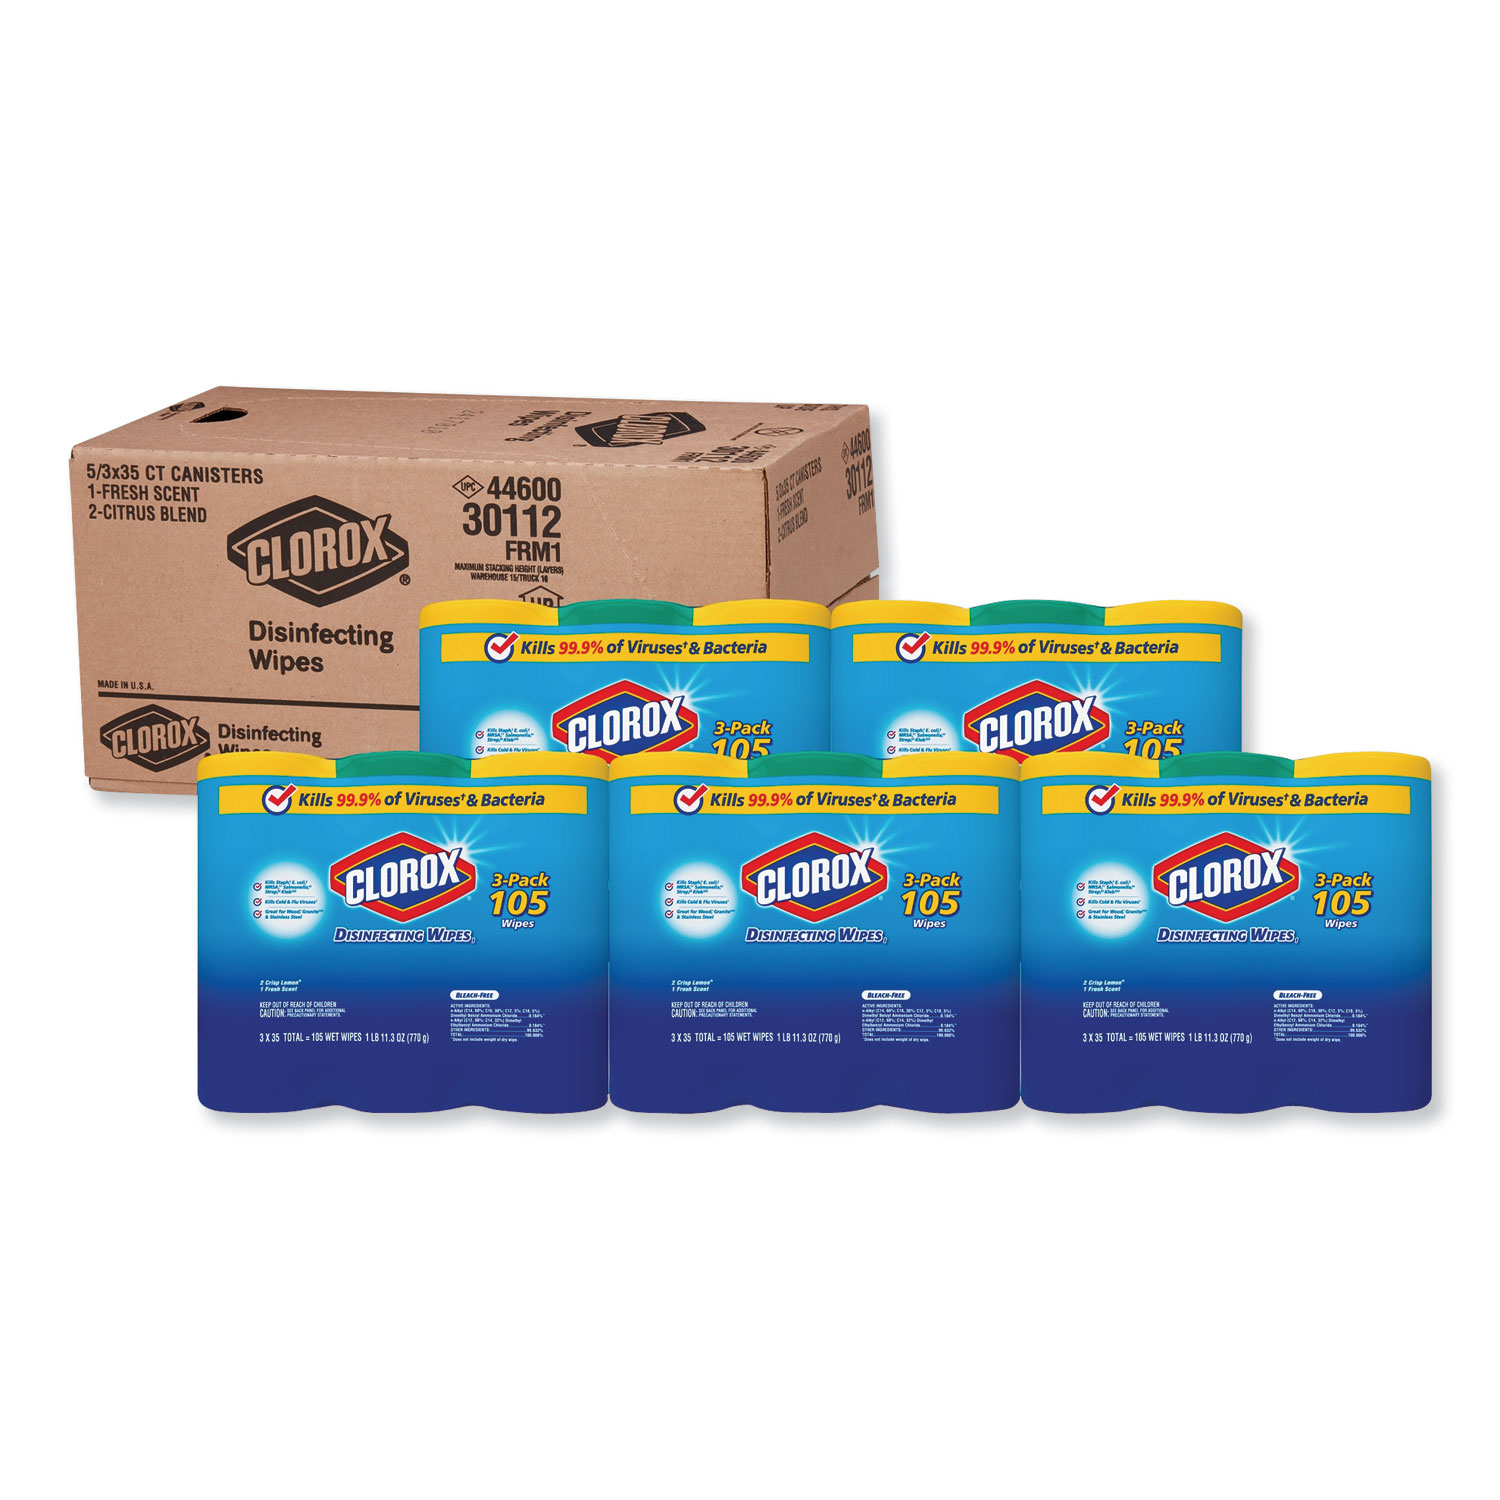  Clorox CLO 30112 Disinfecting Wipes, 7x8, Fresh Scent/Citrus Blend, 35/Canister, 3/PK, 5 Packs/CT (CLO30112CT) 